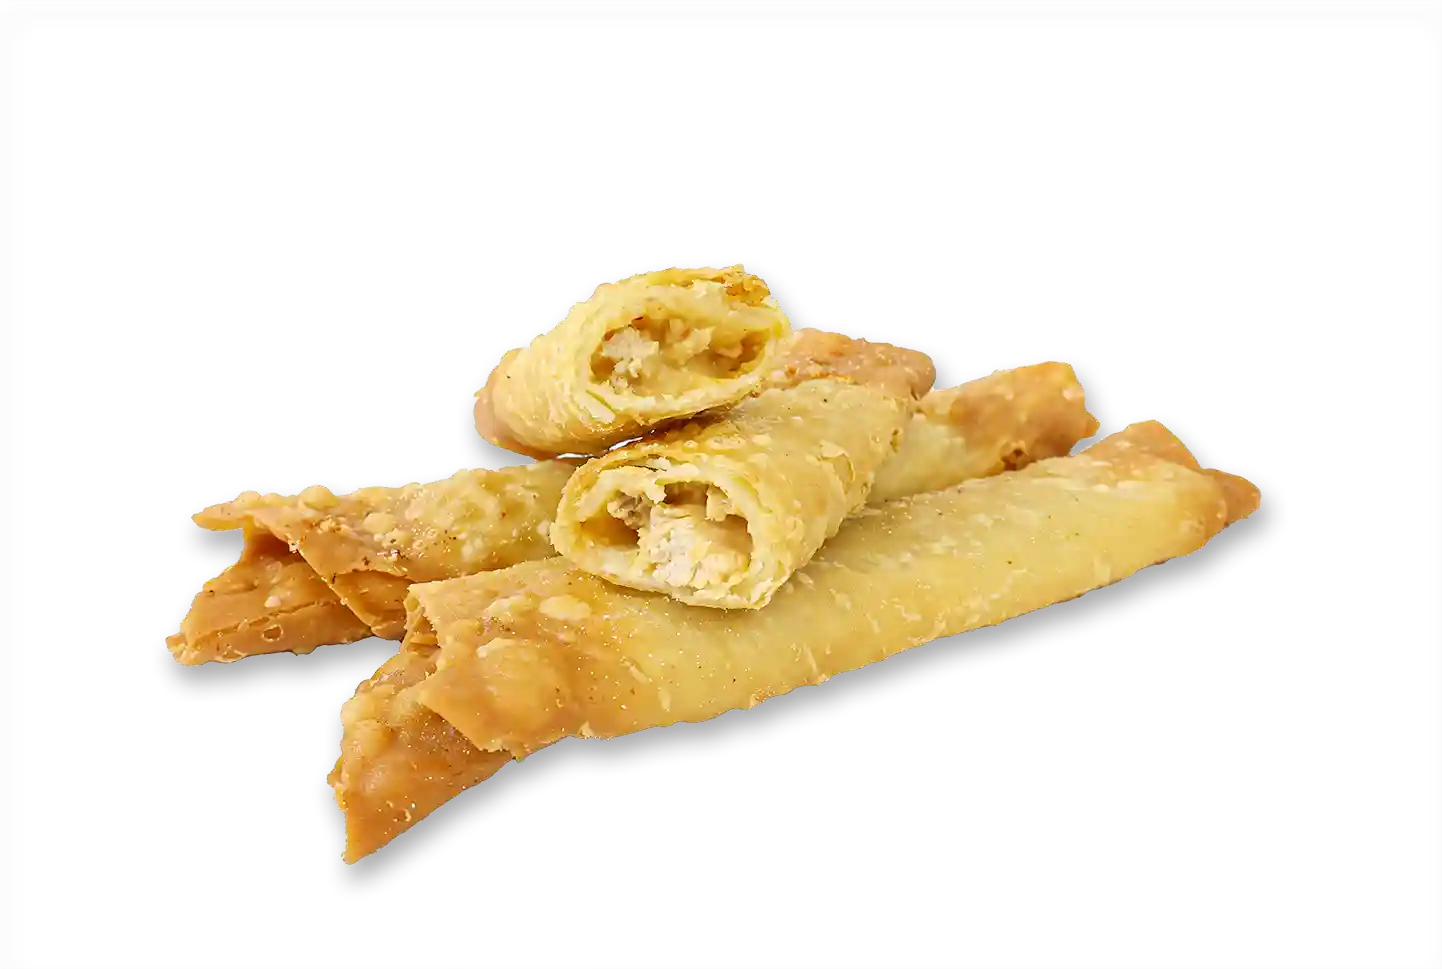 State Fair® Crispitos® Fully Cooked Buffalo Style Chicken and Cheese Flour Tortillashttps://images.salsify.com/image/upload/s--GmiRnA6K--/q_25/wsqwa8srl3xzdujqqi75.webp